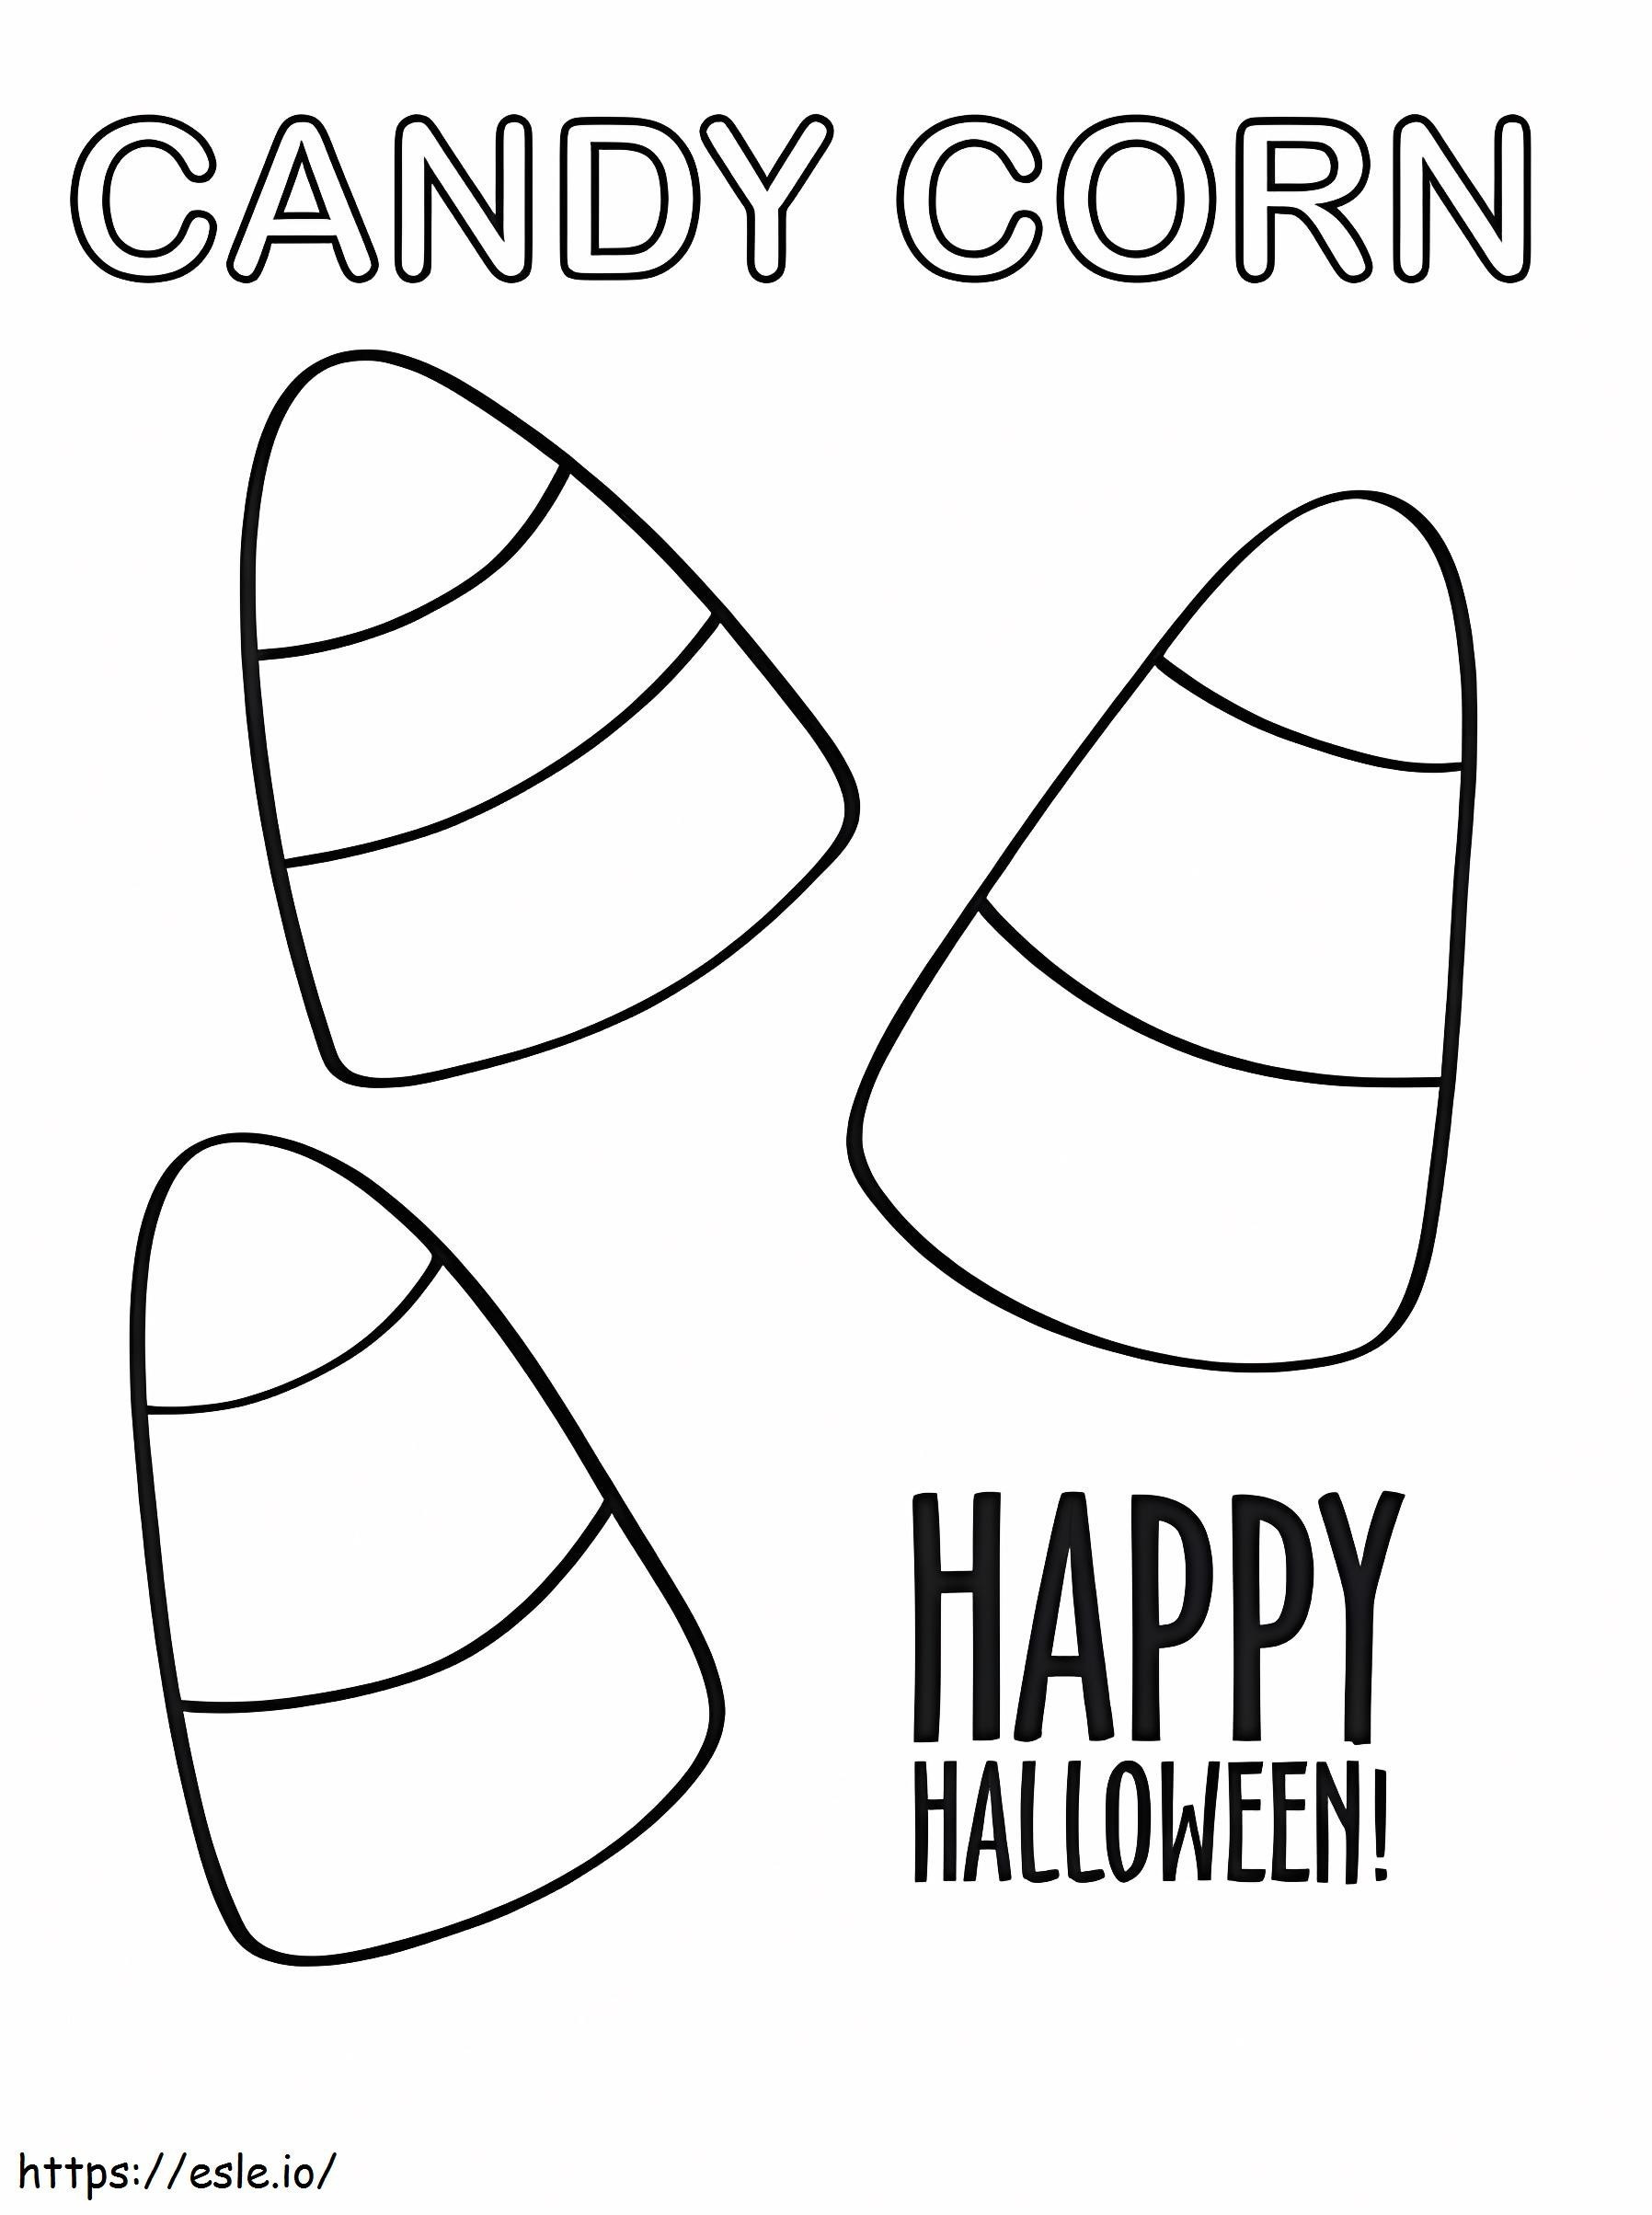 Three Candy Corn coloring page